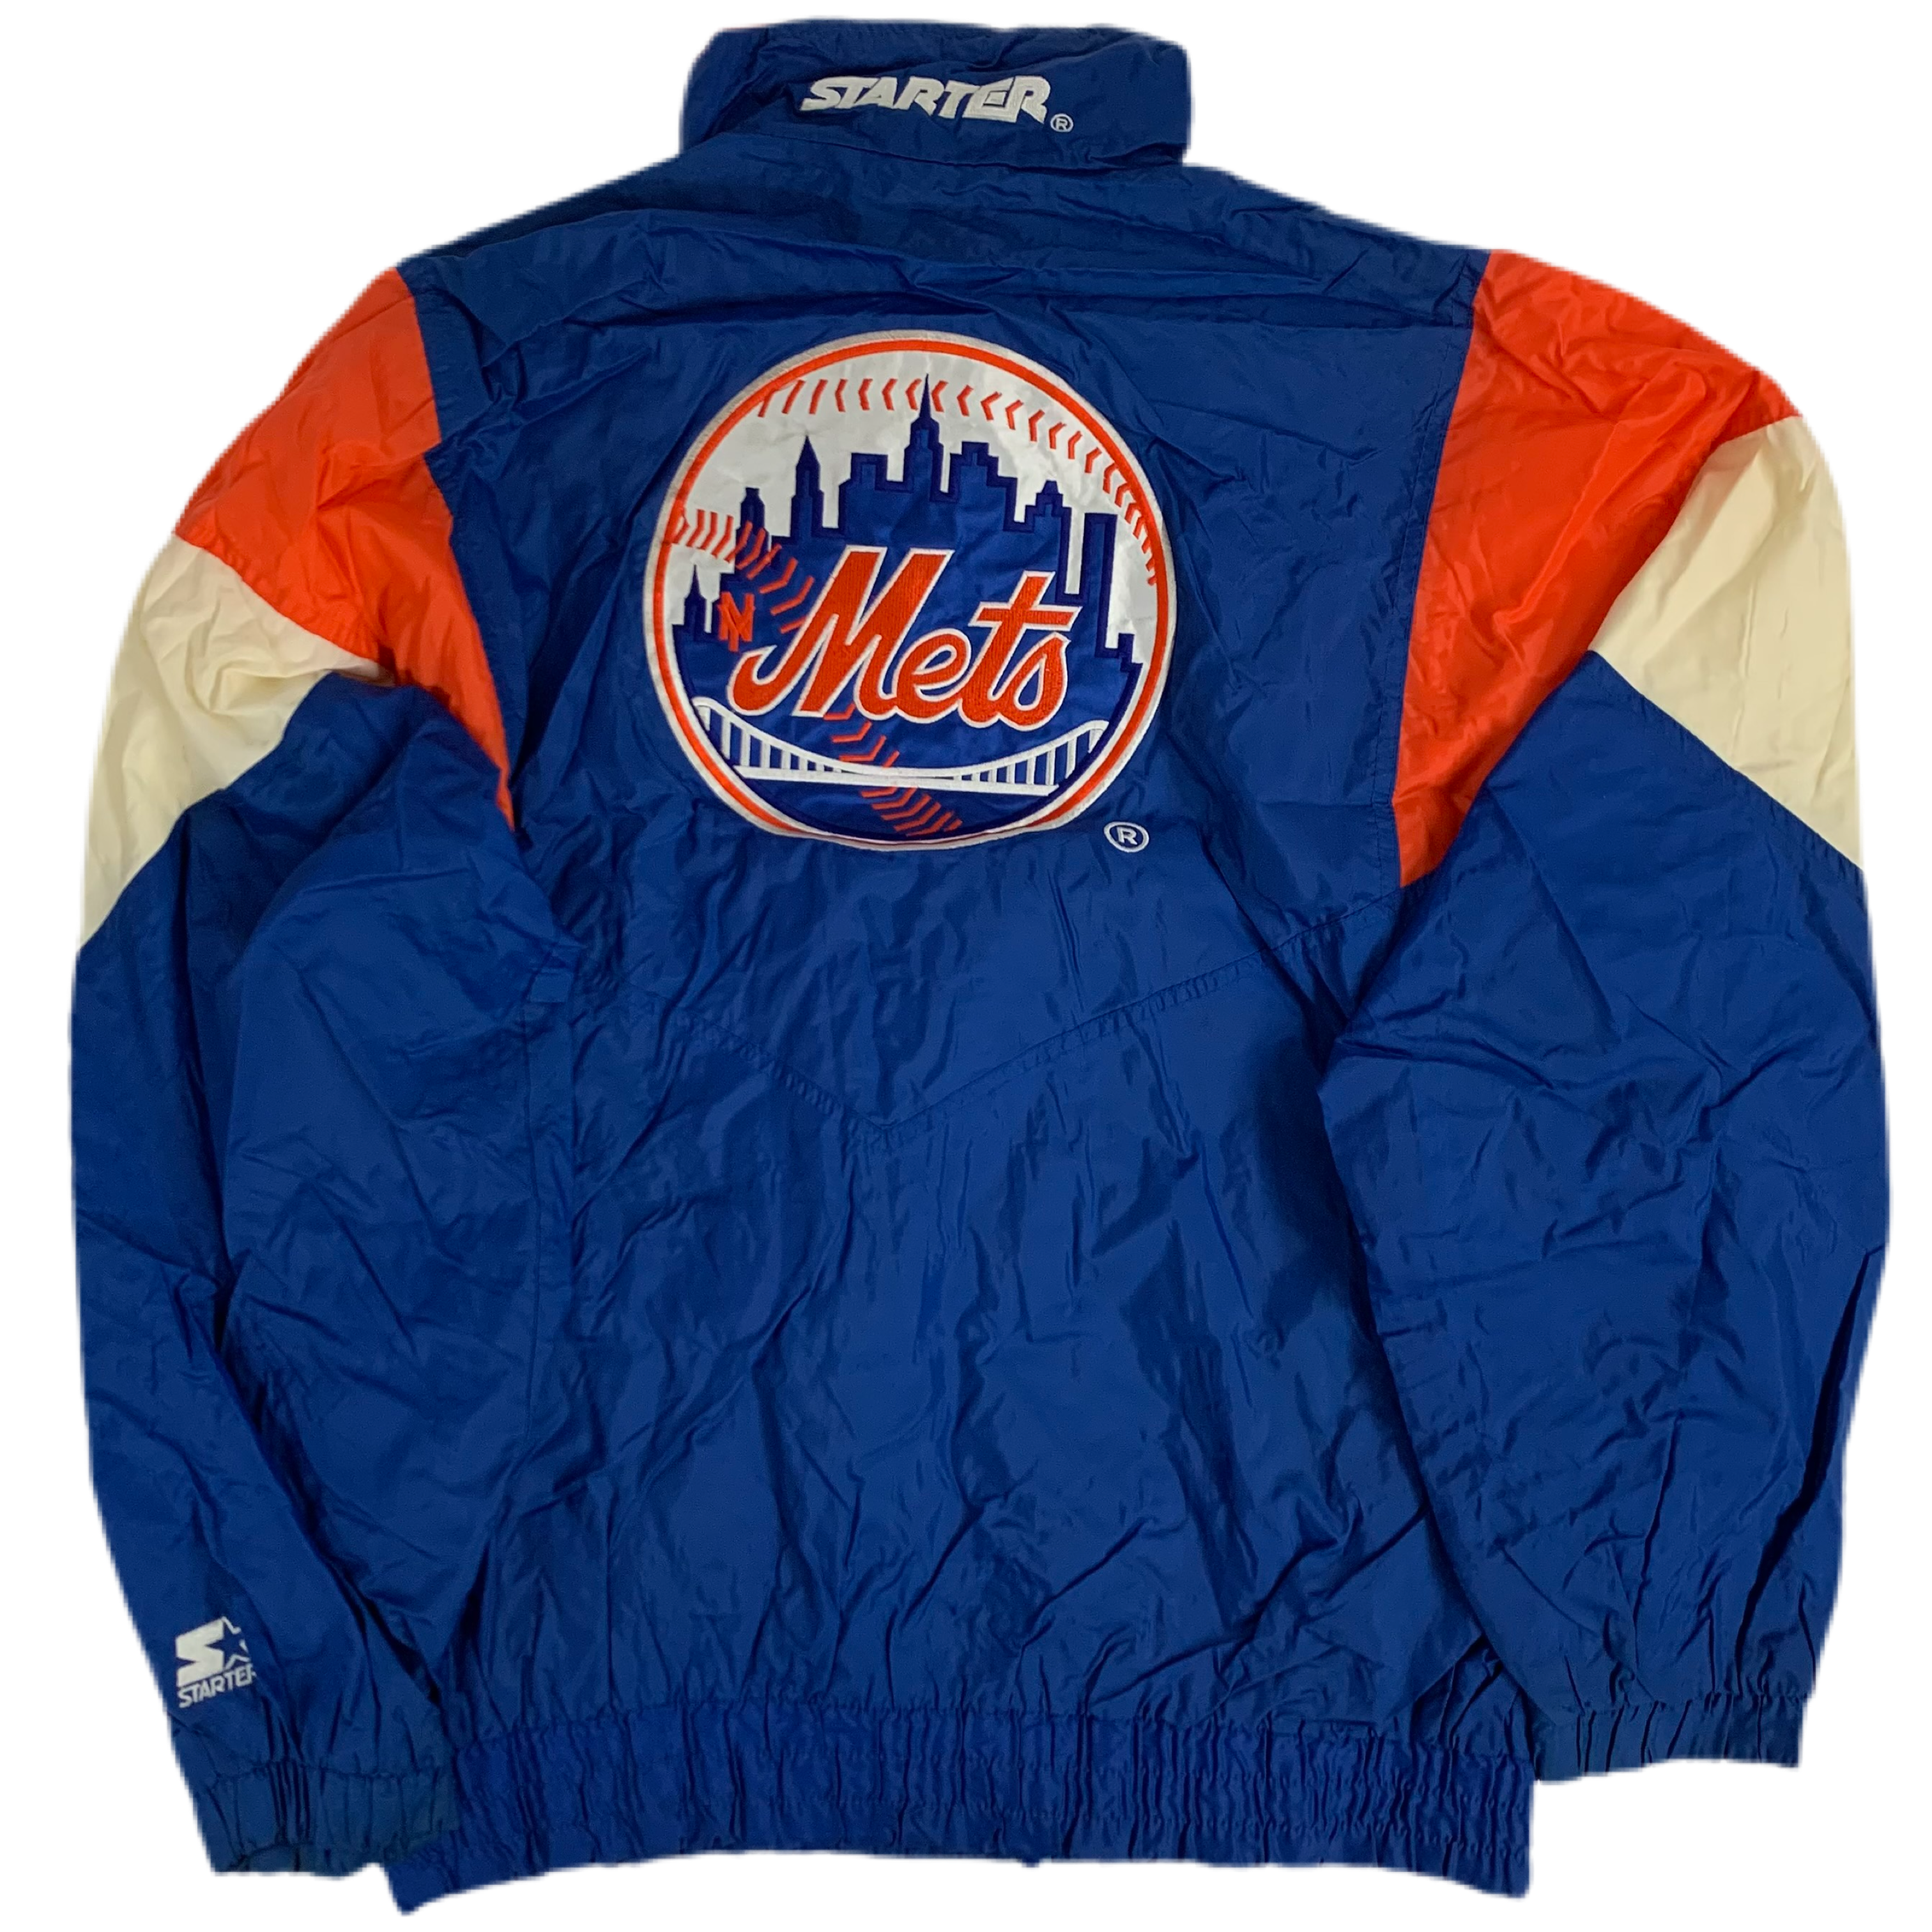 World Series New York Mets MLB Jackets for sale